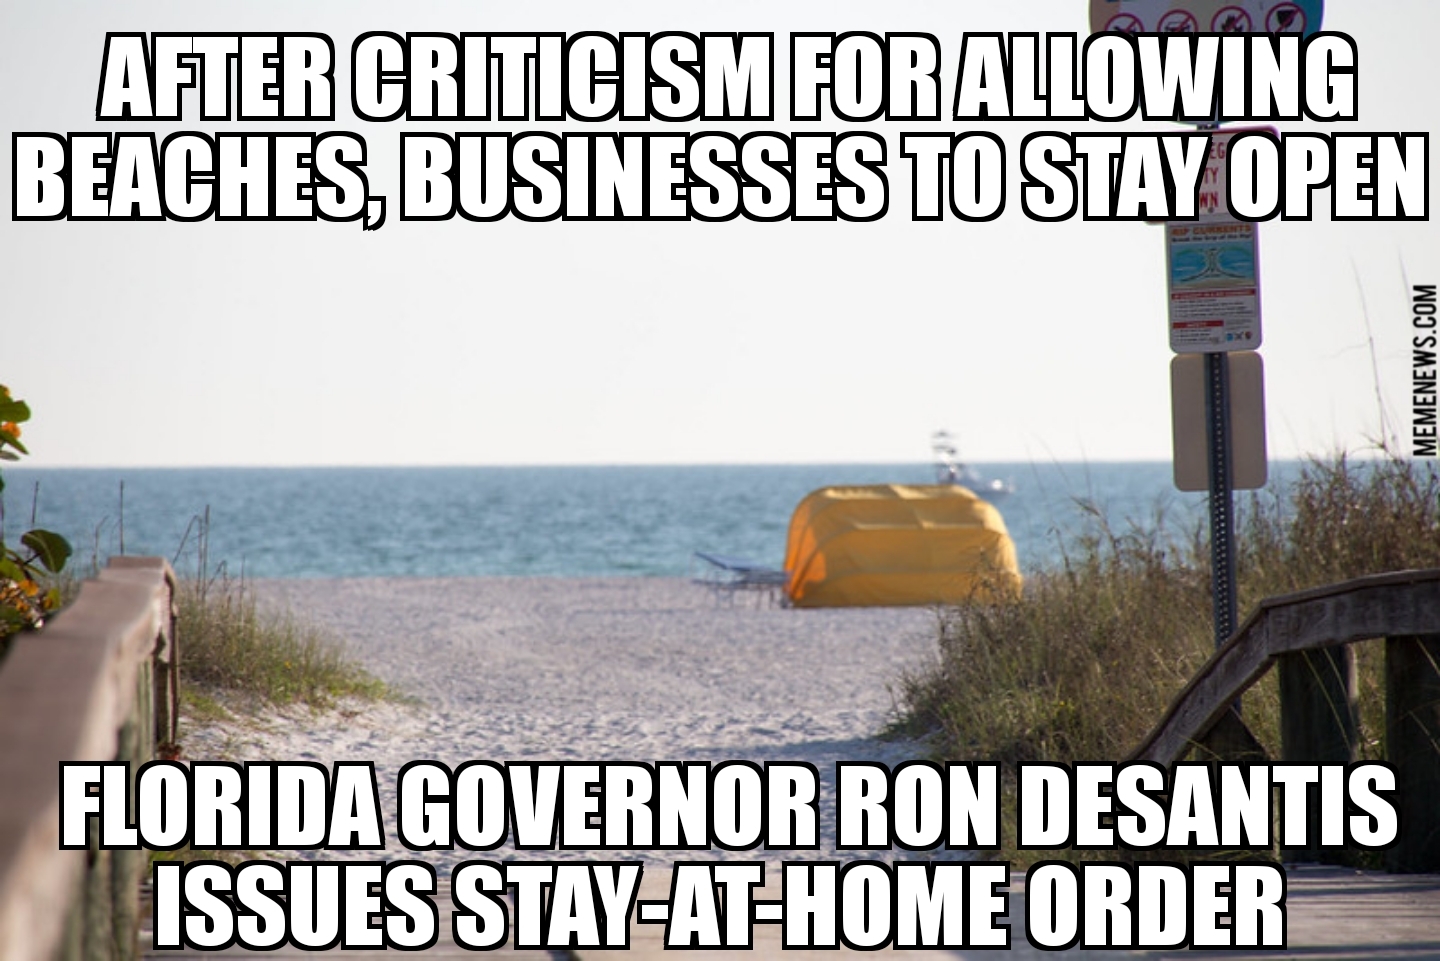 Florida governor issues stay-at-home order